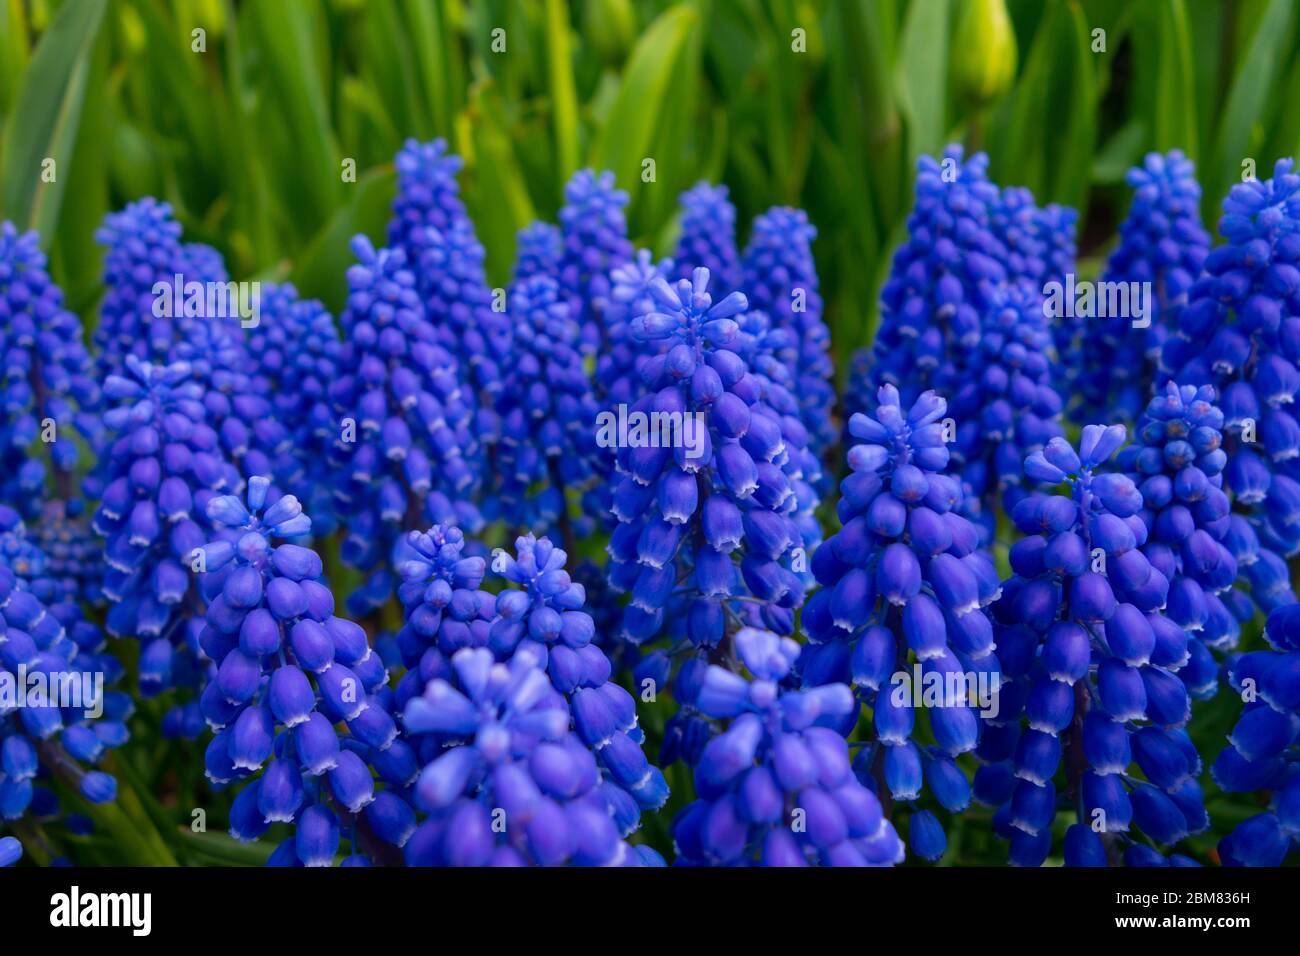 cluster of grape hyacinth flowers in an outdoor garden Stock Photo